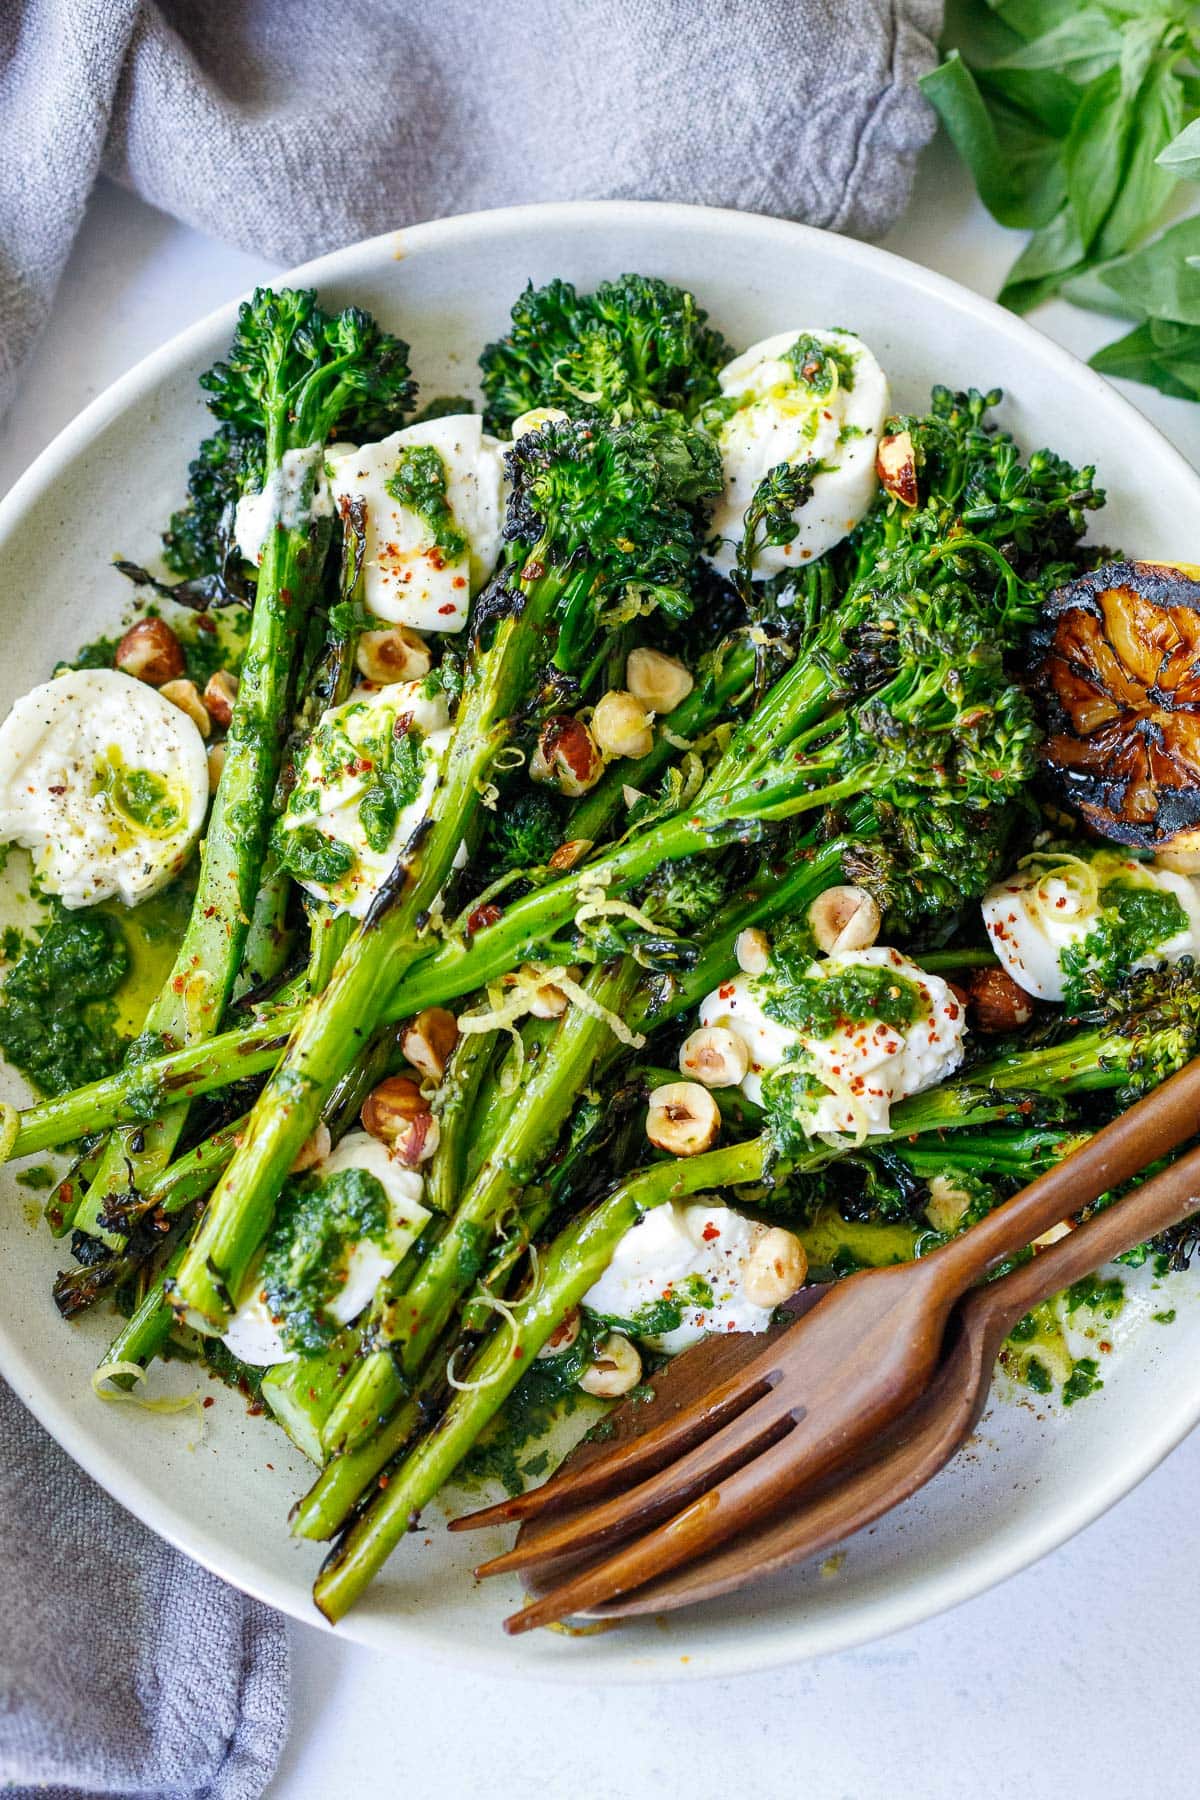 Grilled Broccolini with burrata, hazelnuts and basil oil- a tasty summer side dish perfect for outdoor dinners and gatherings. 